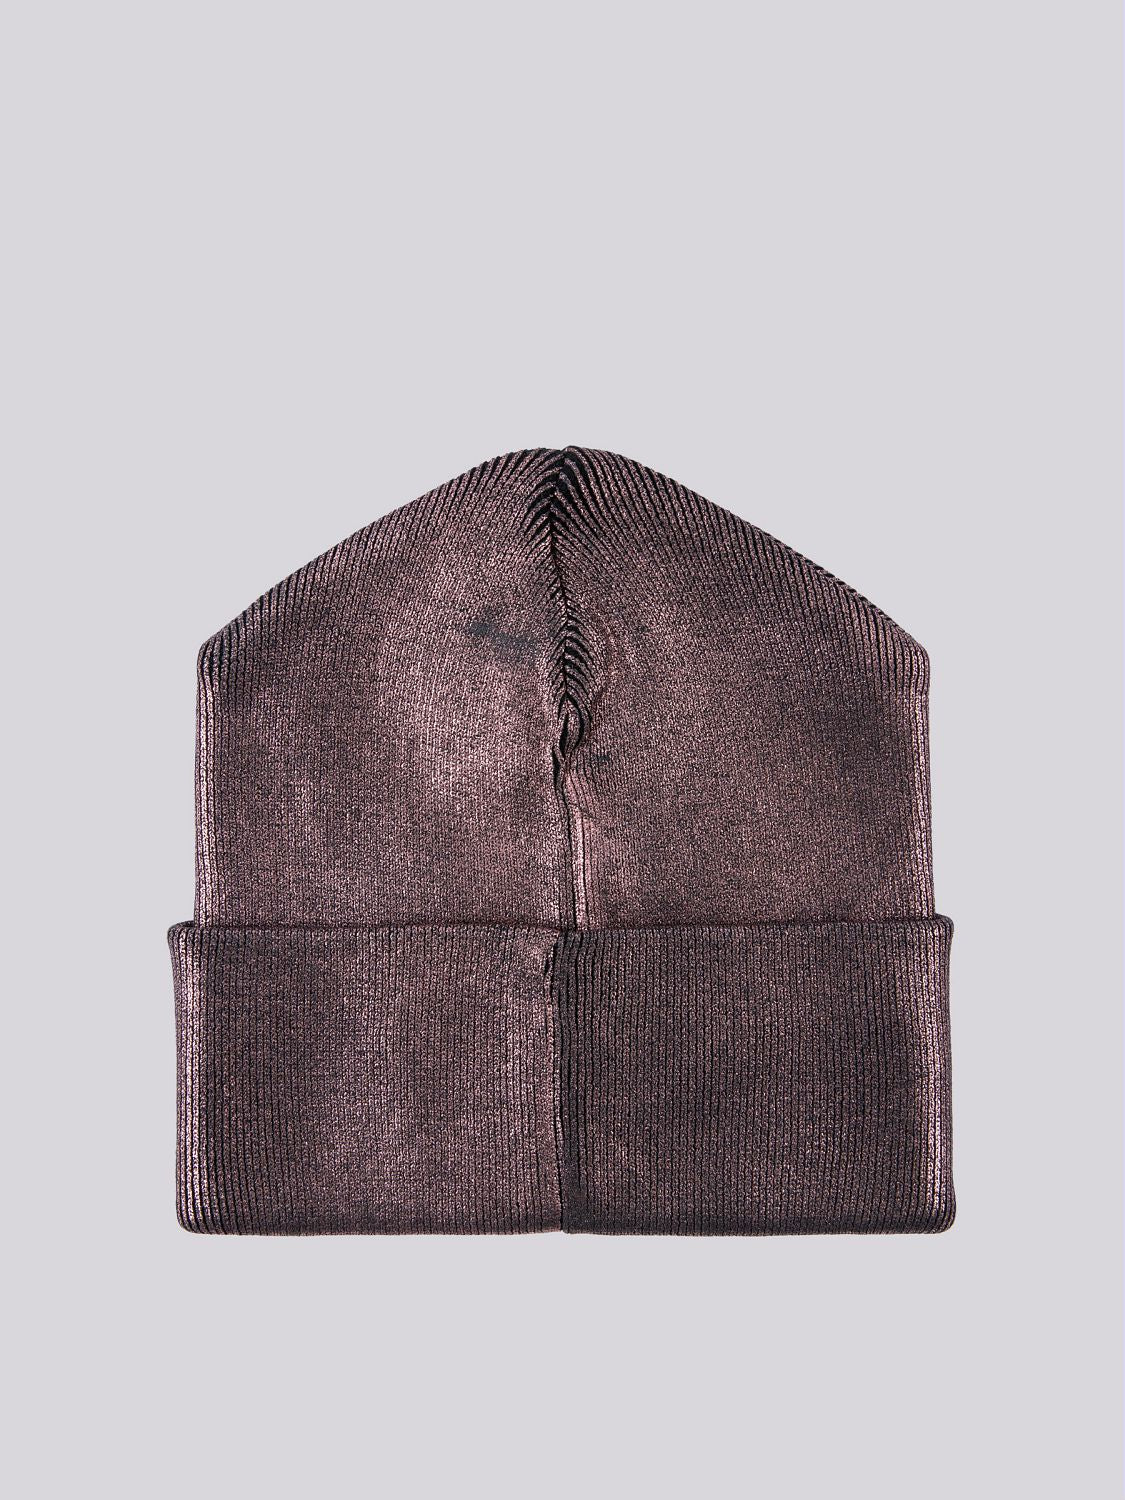 Beanie in Cotton Blend with Laminated Effect